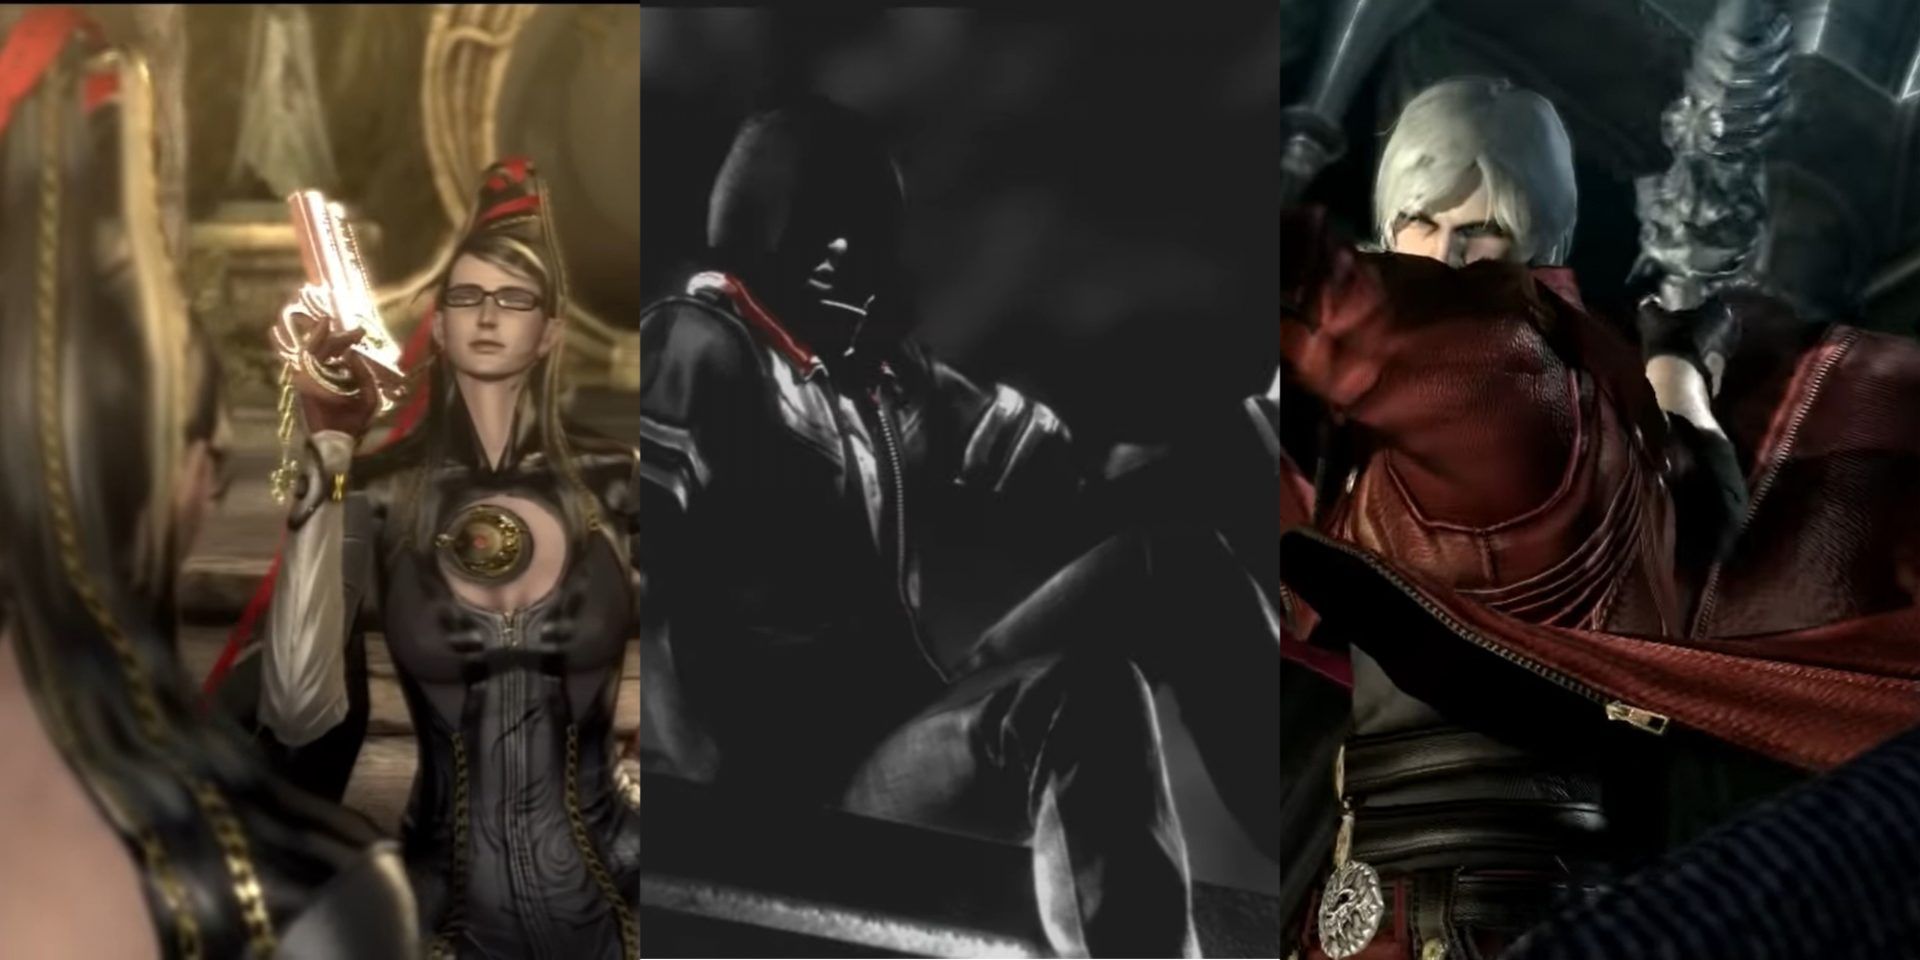 Bayonetta, Dante, and other heroes that become villains later in their respective games.